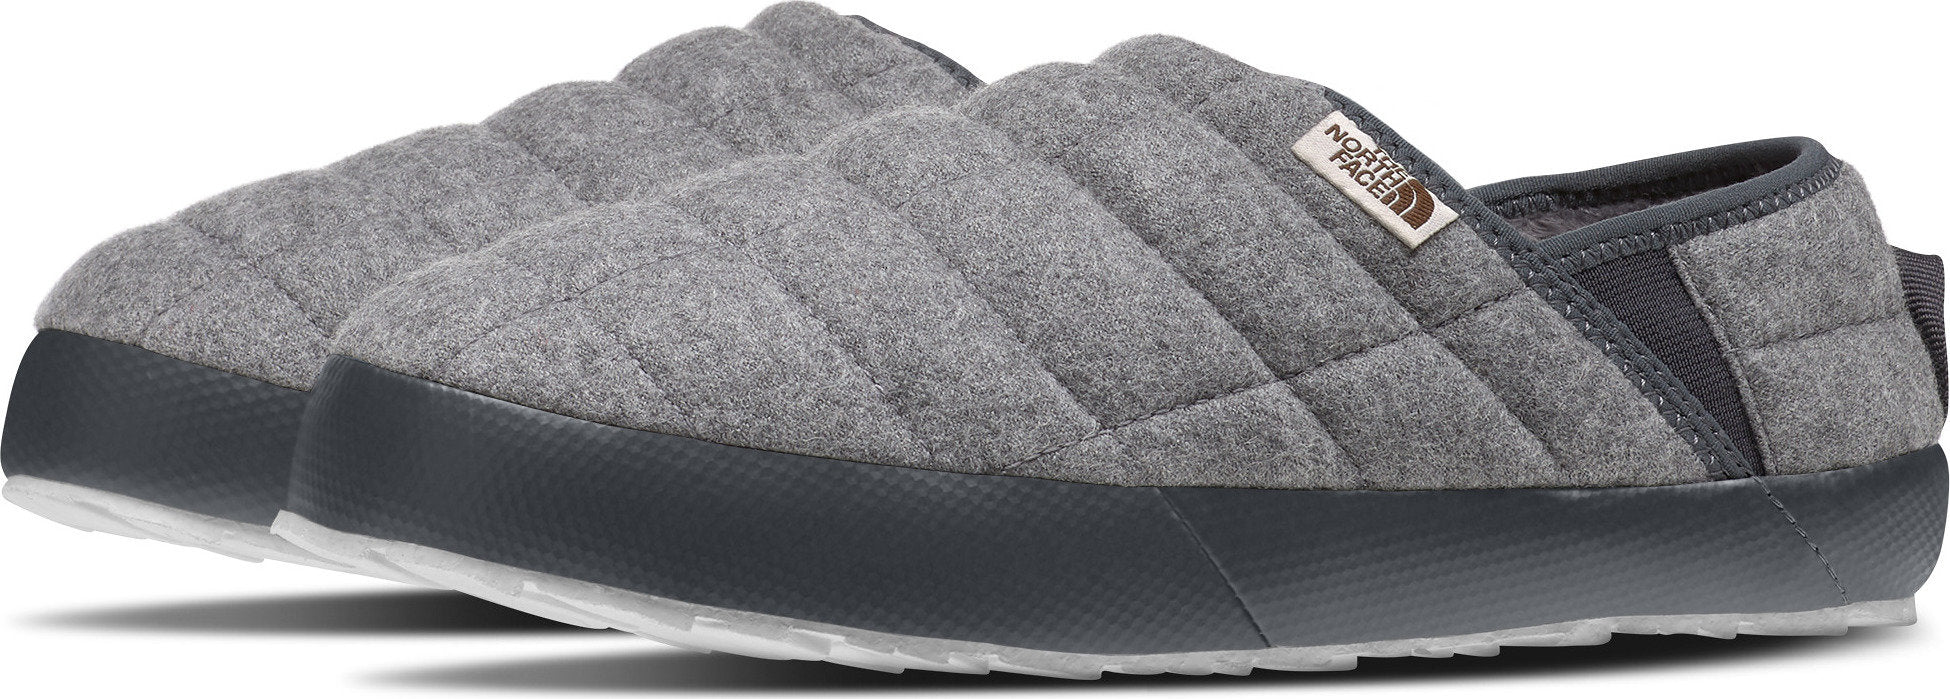 north face men's thermoball traction mule